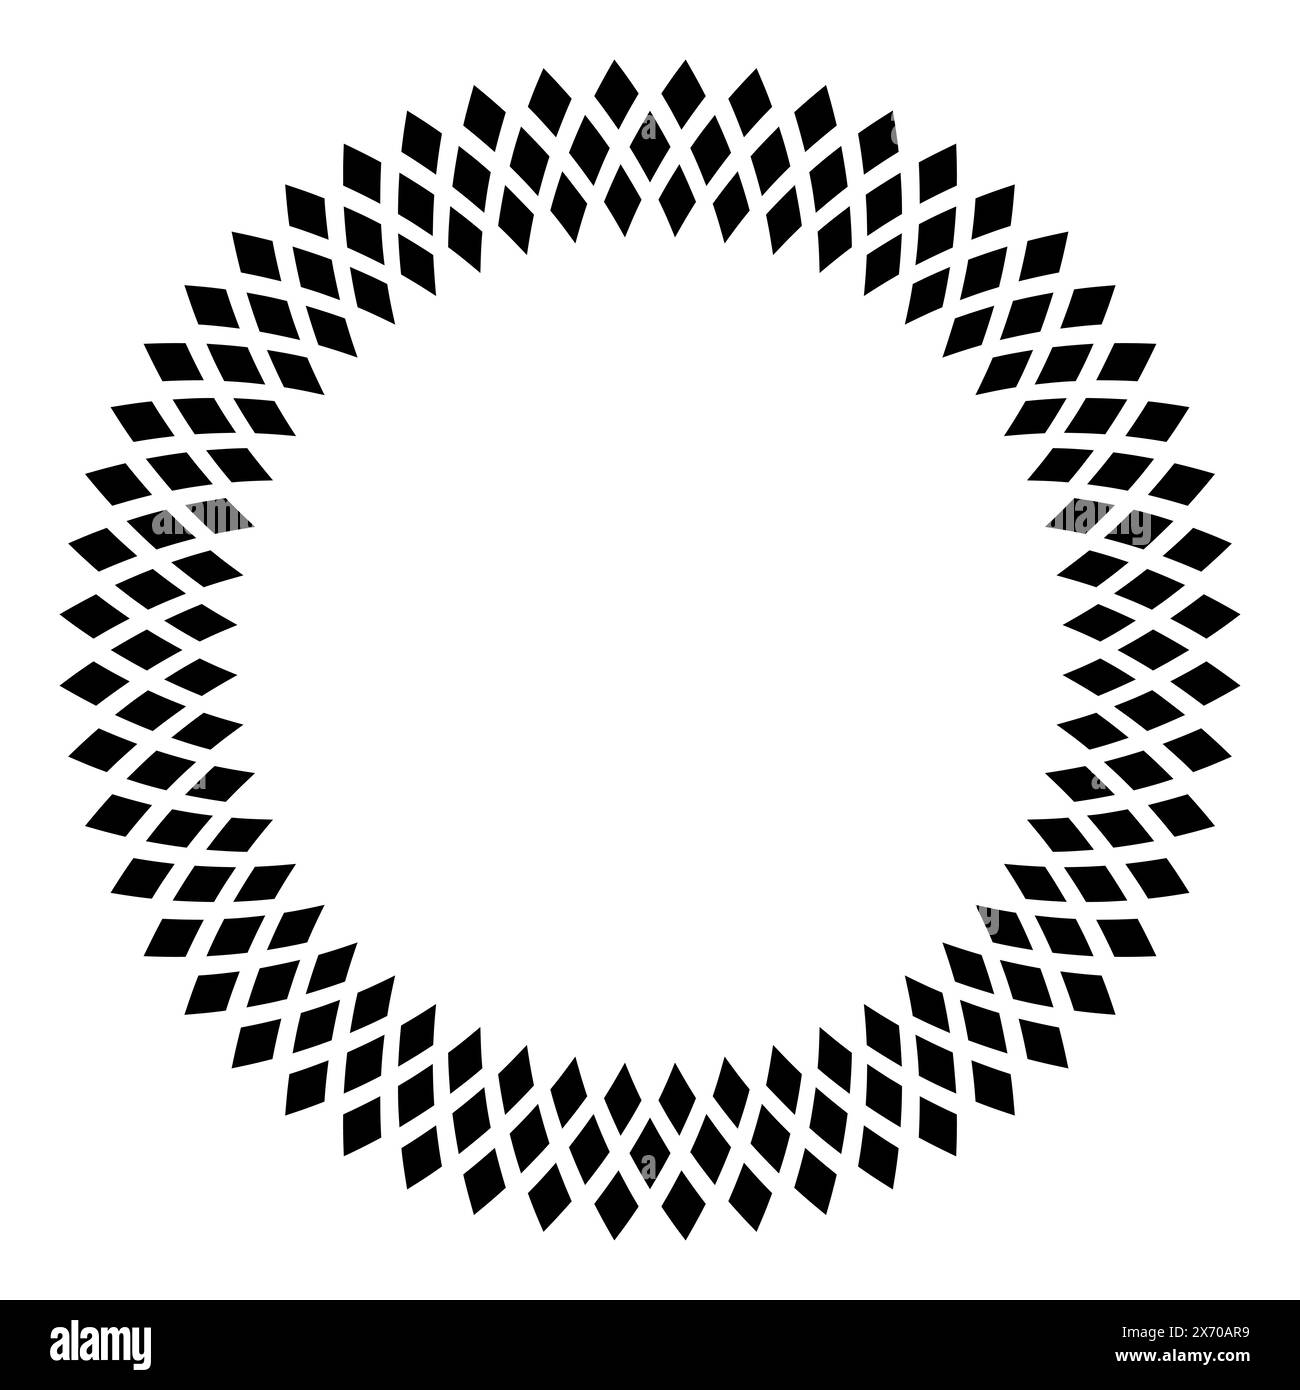 Diamond pattern circle frame. Three rows of black diamond shapes, creating a decorative border with Hermann grid and scintillating grid illusion. Stock Photo